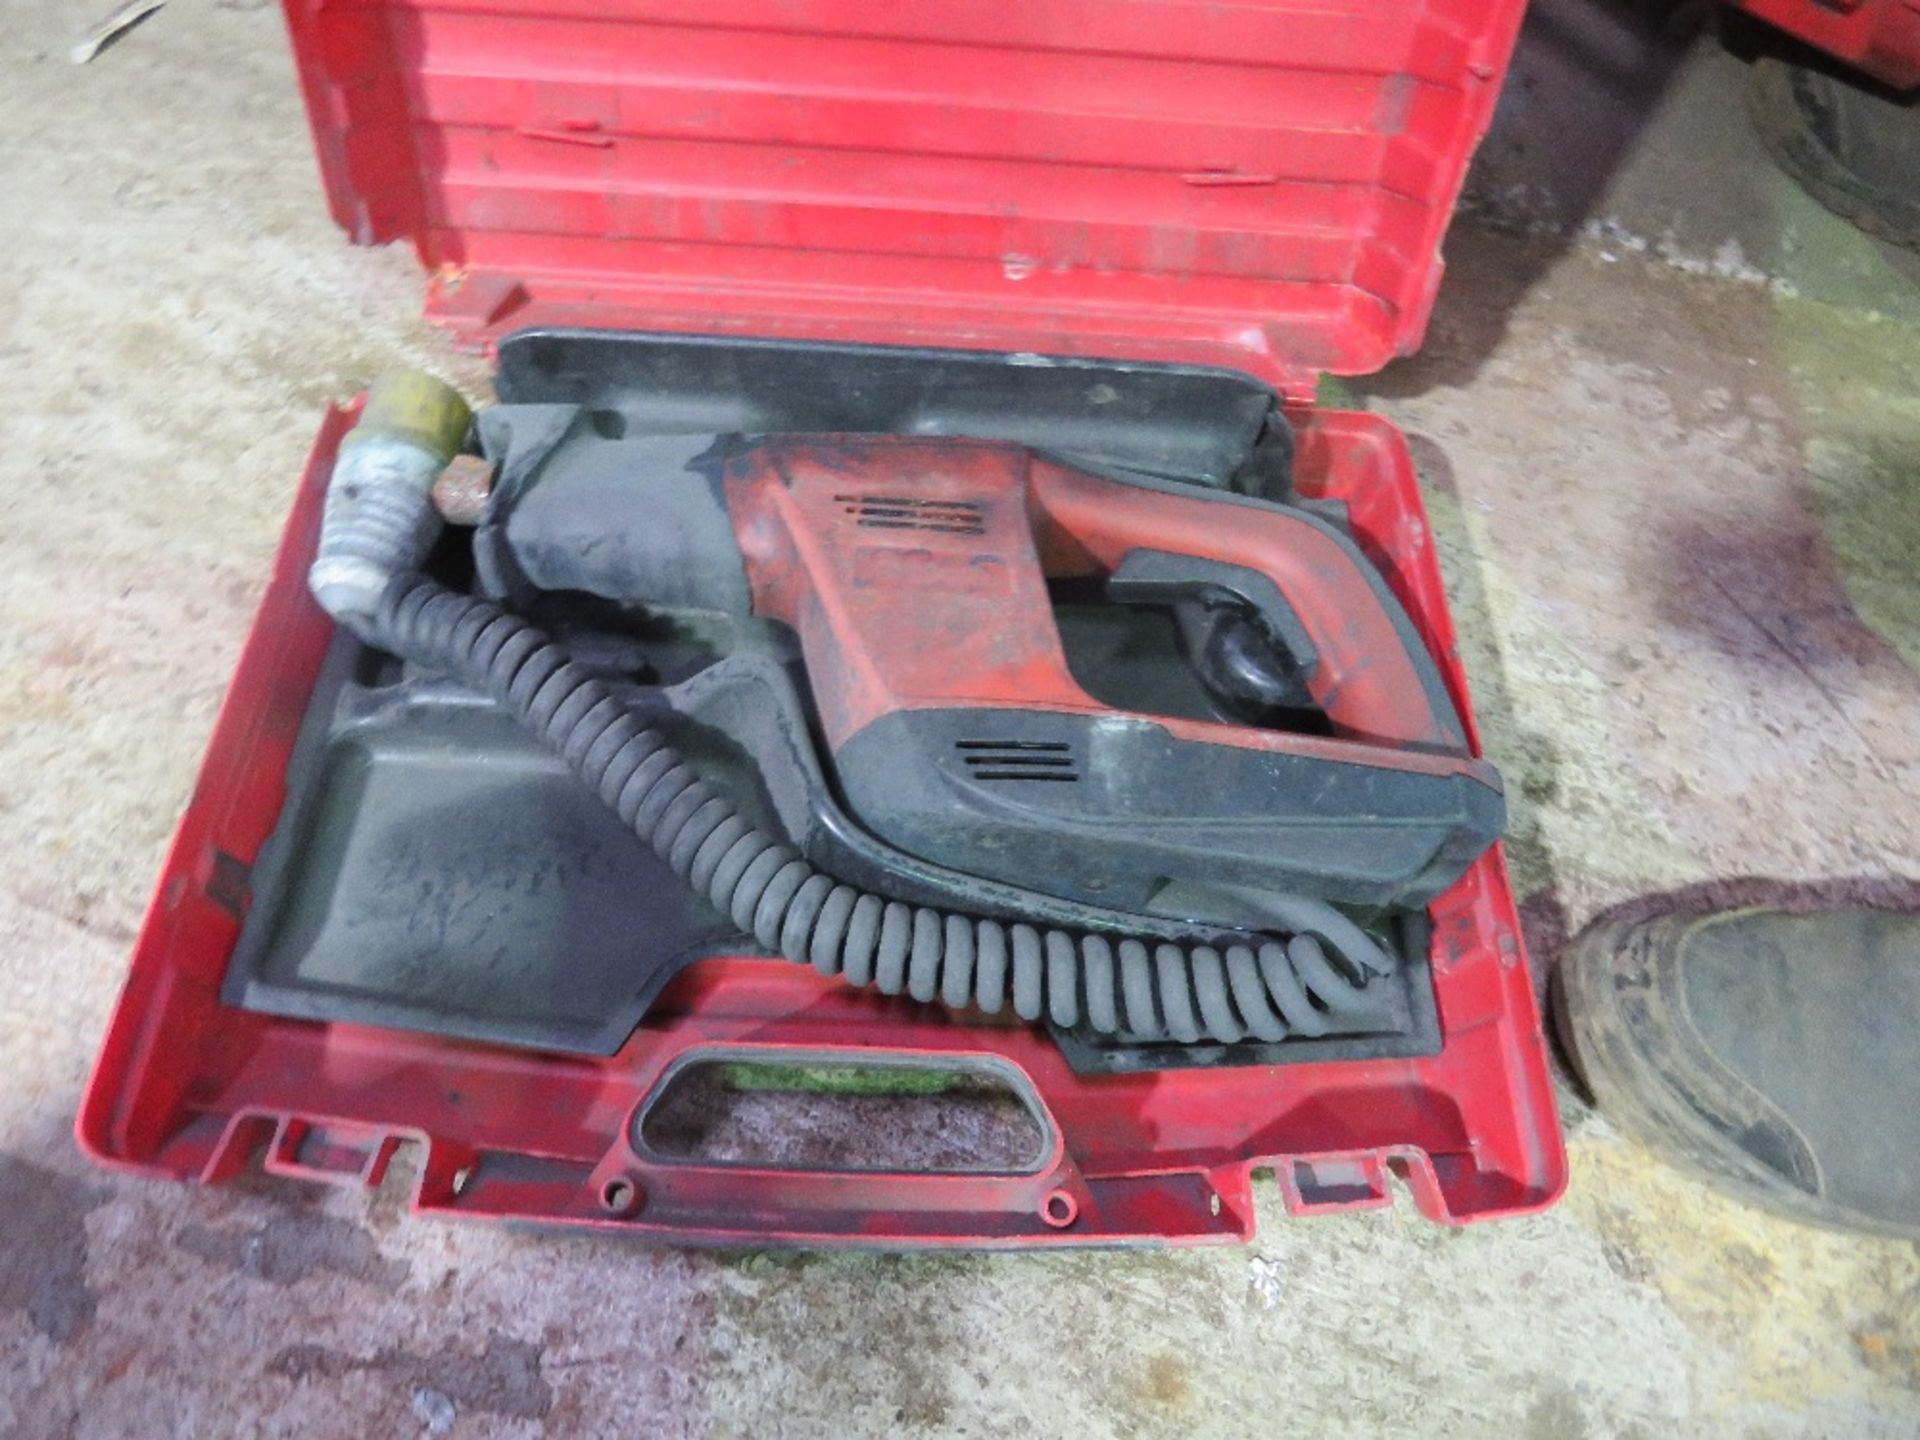 4 X HILTI 110VOLT POWERED RECIPROCATING SAWS. - Image 5 of 5